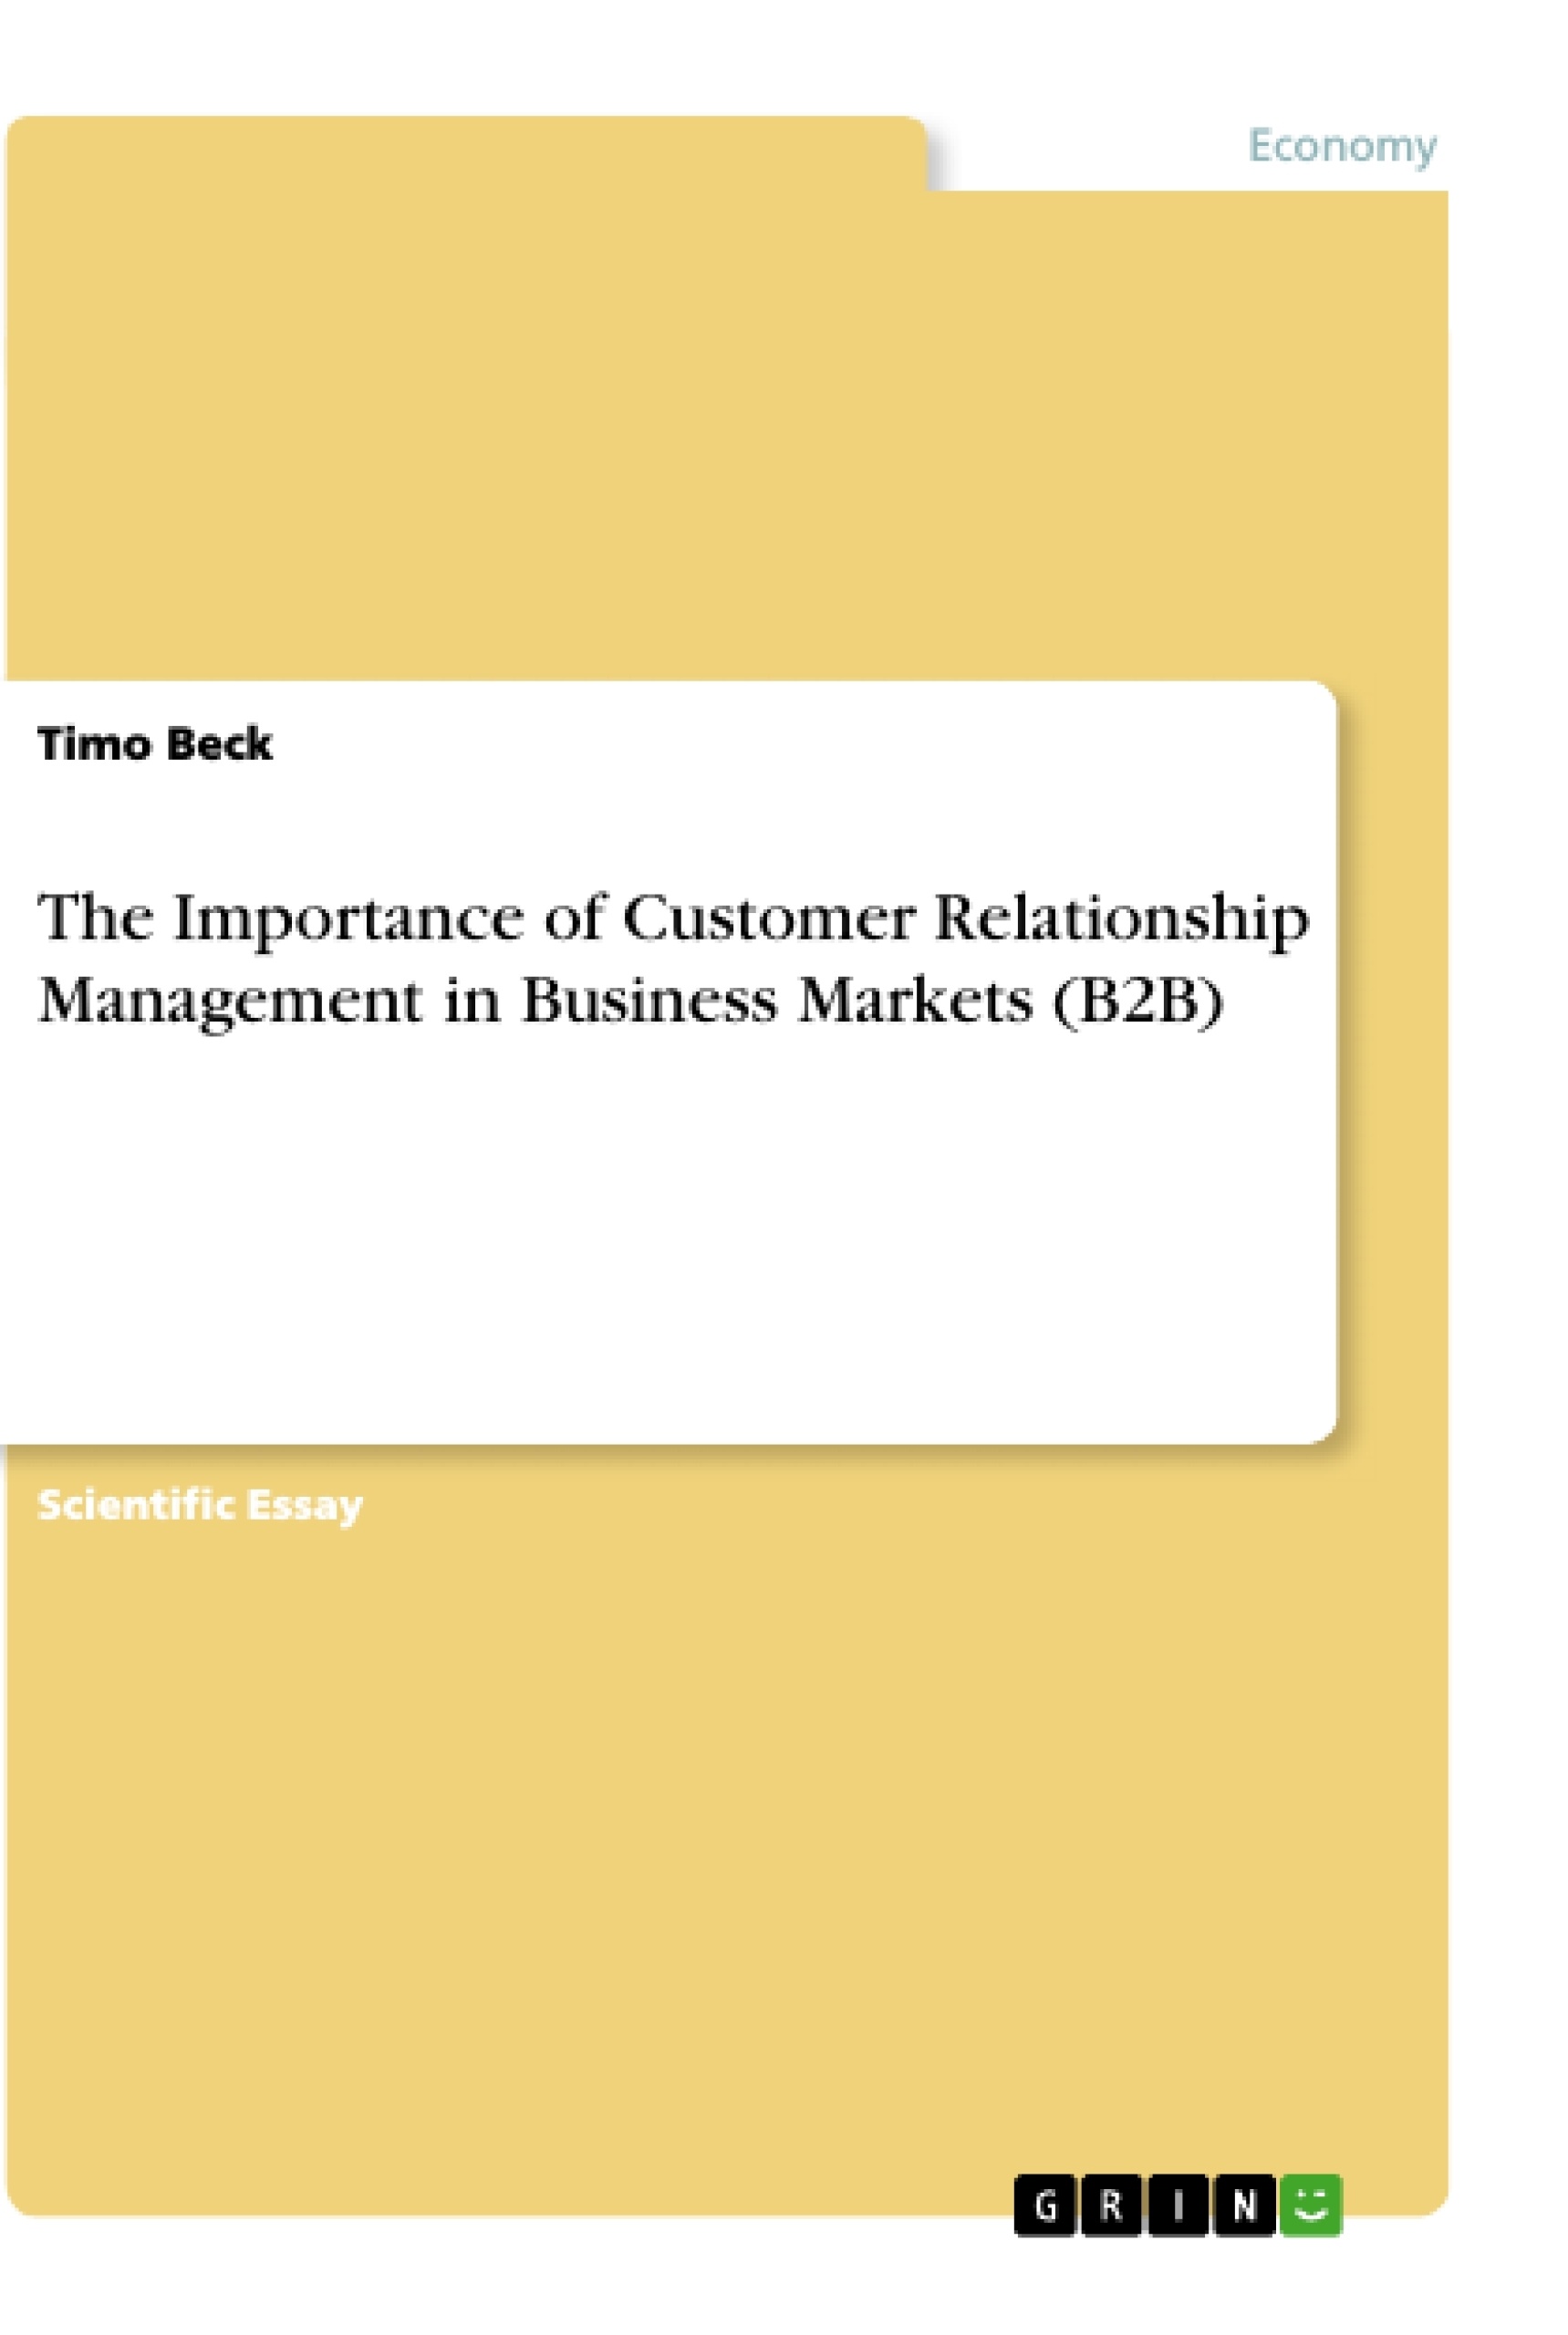 Title: The Importance of Customer Relationship Management in Business Markets (B2B)